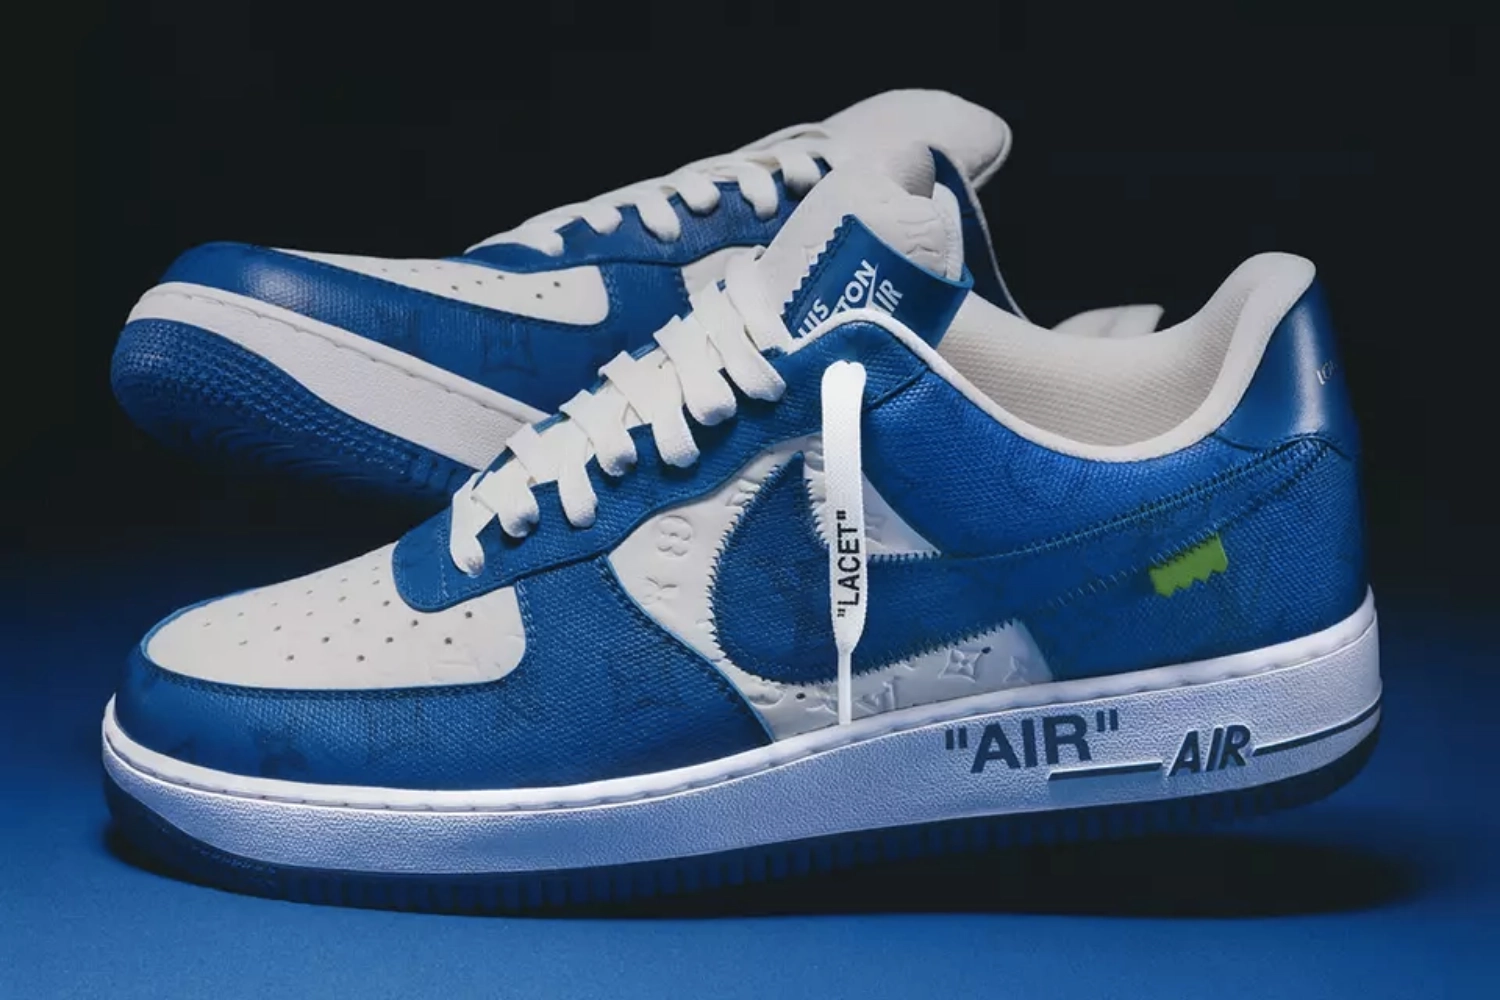 Louis Vuitton x Nike Air Force 1s by Virgil release is getting closer